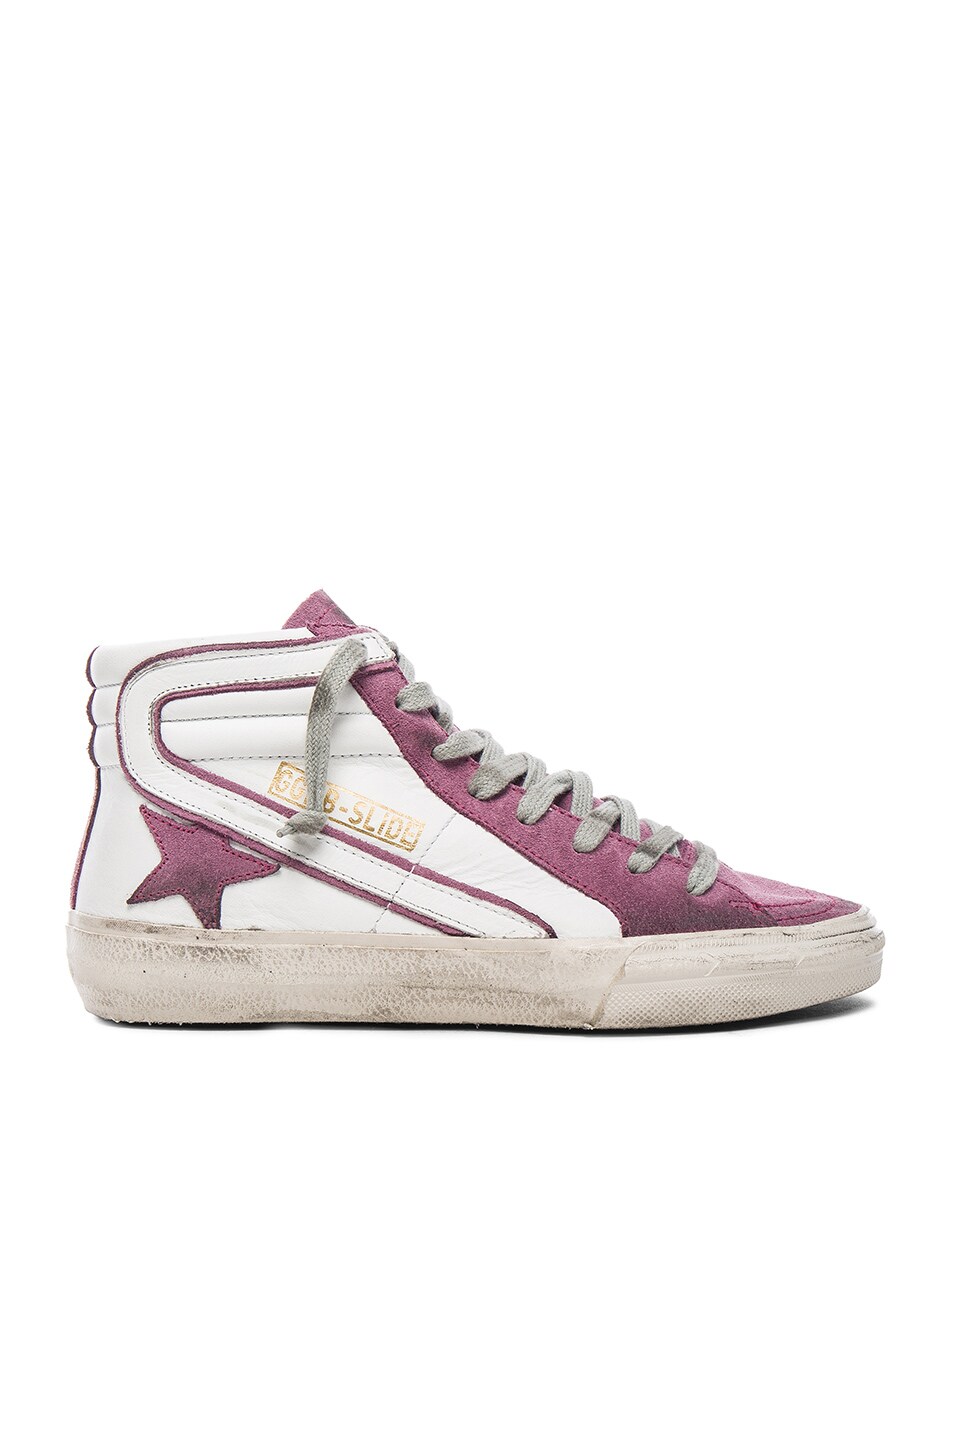 Image 1 of Golden Goose Leather Slide Sneakers in White & Pink